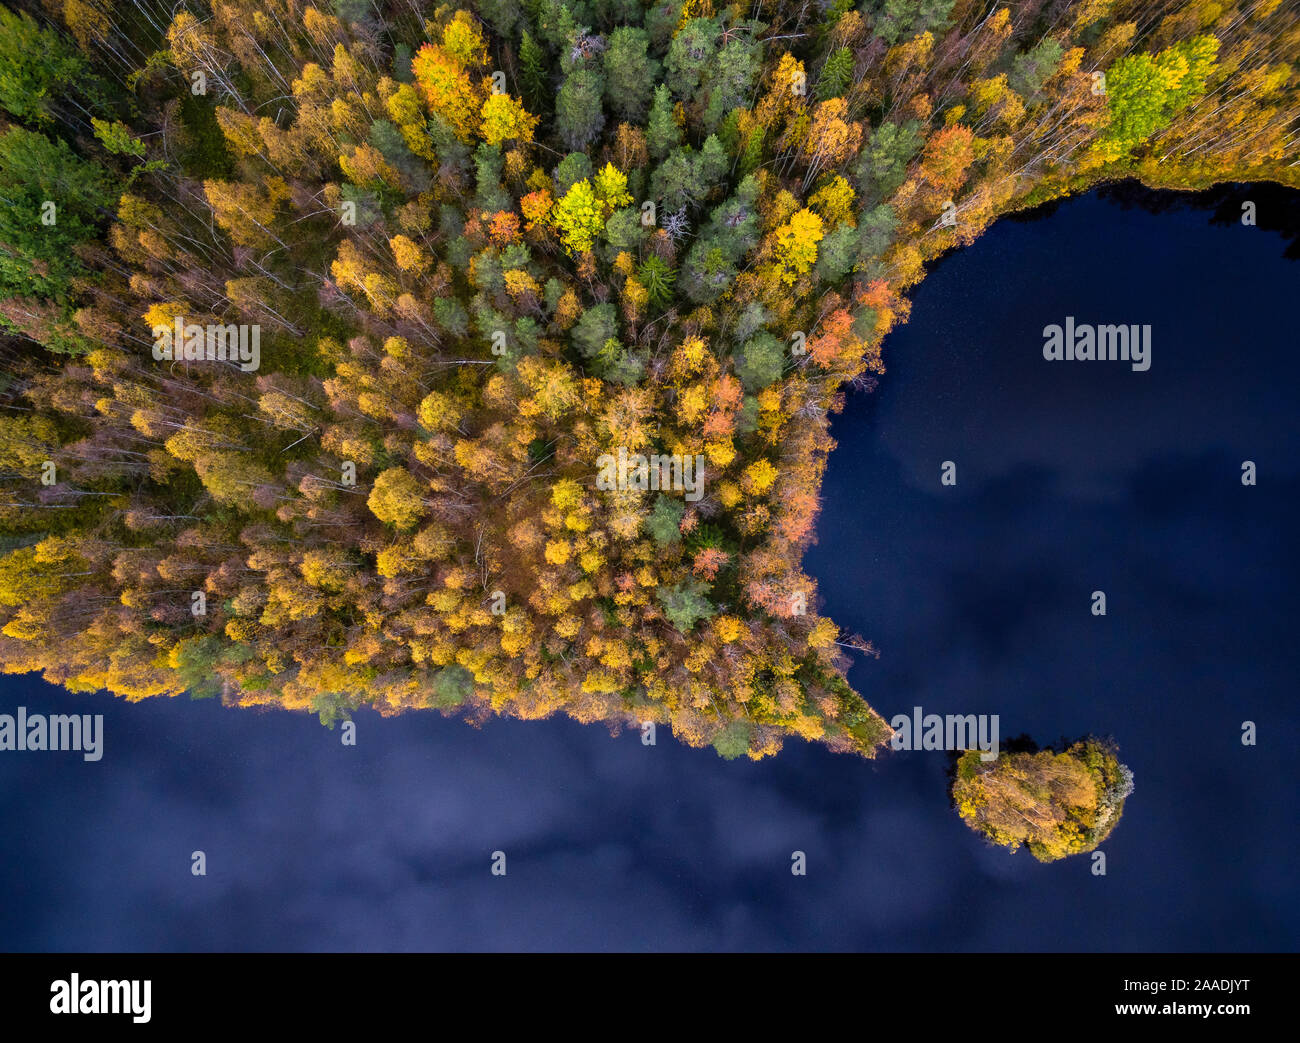 Taiga forest photographed from air, Finland, September 2016. Highly commended in the GDT European Wildlife Photographer of the Year Awards 2017 and  Honorable mention  in Beauty of Nature Category of the Siena International Photography Awards 2017. Stock Photo